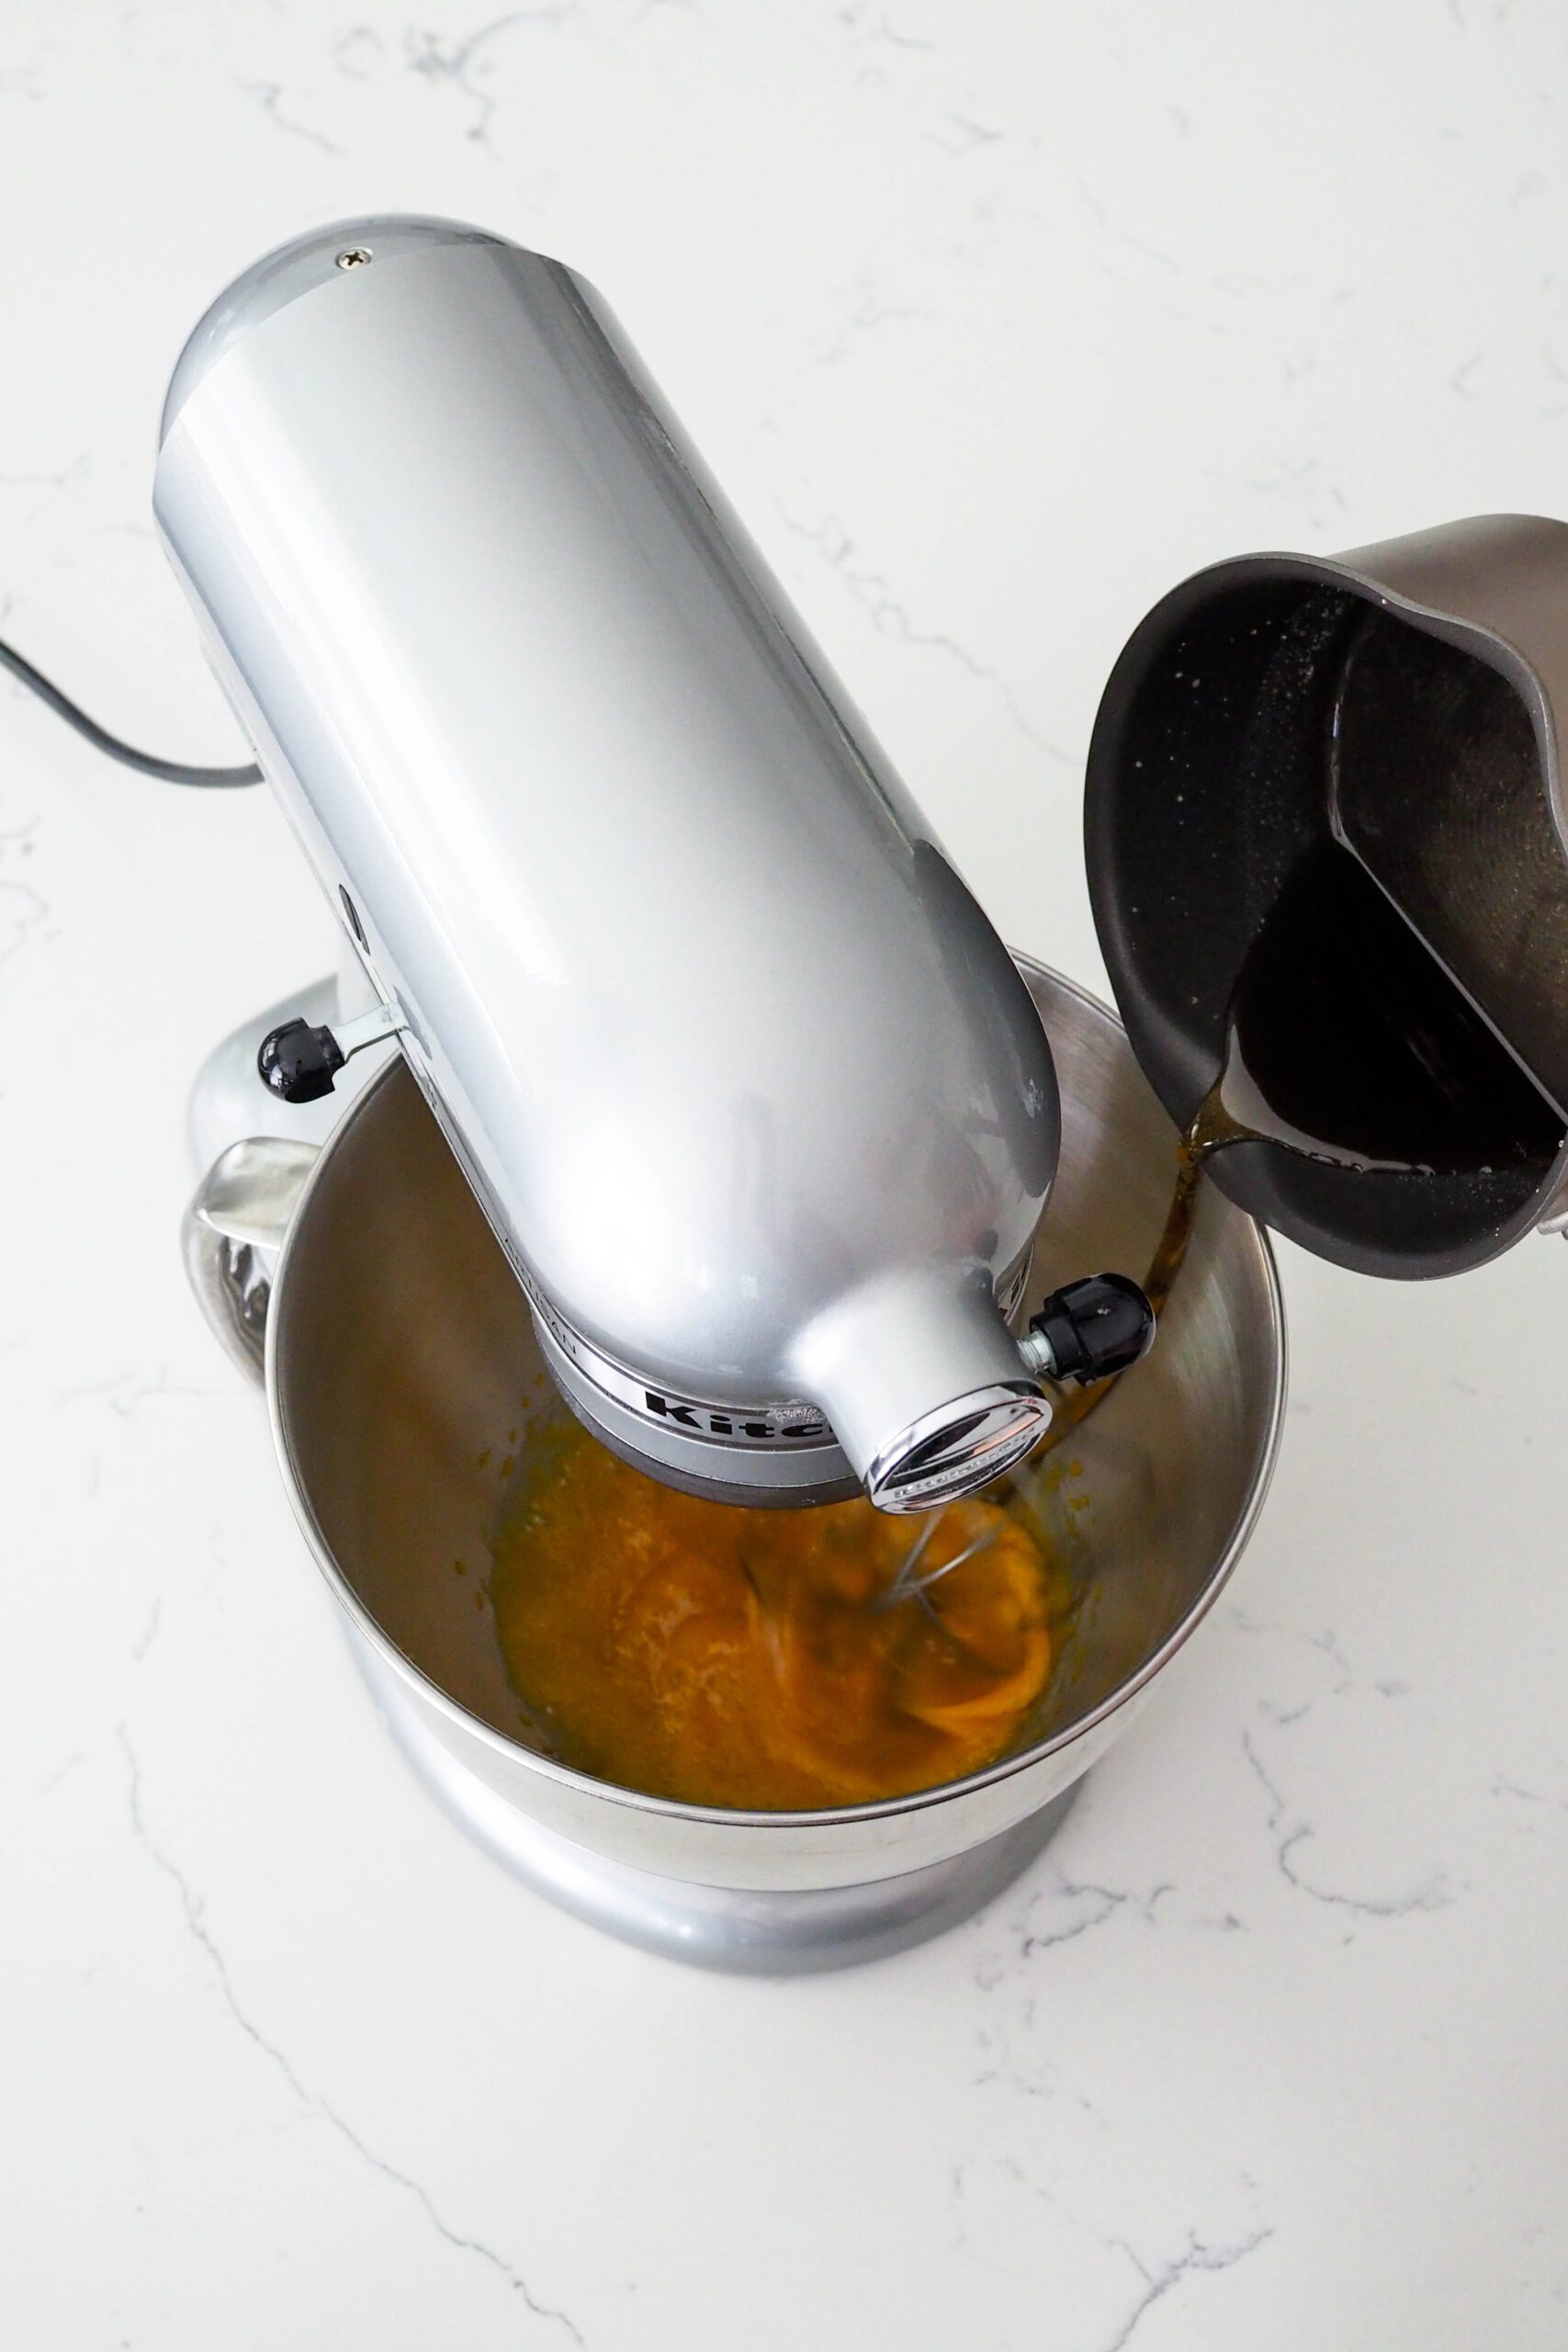 Sugar is poured into a stand mixer bowl from a saucepan.